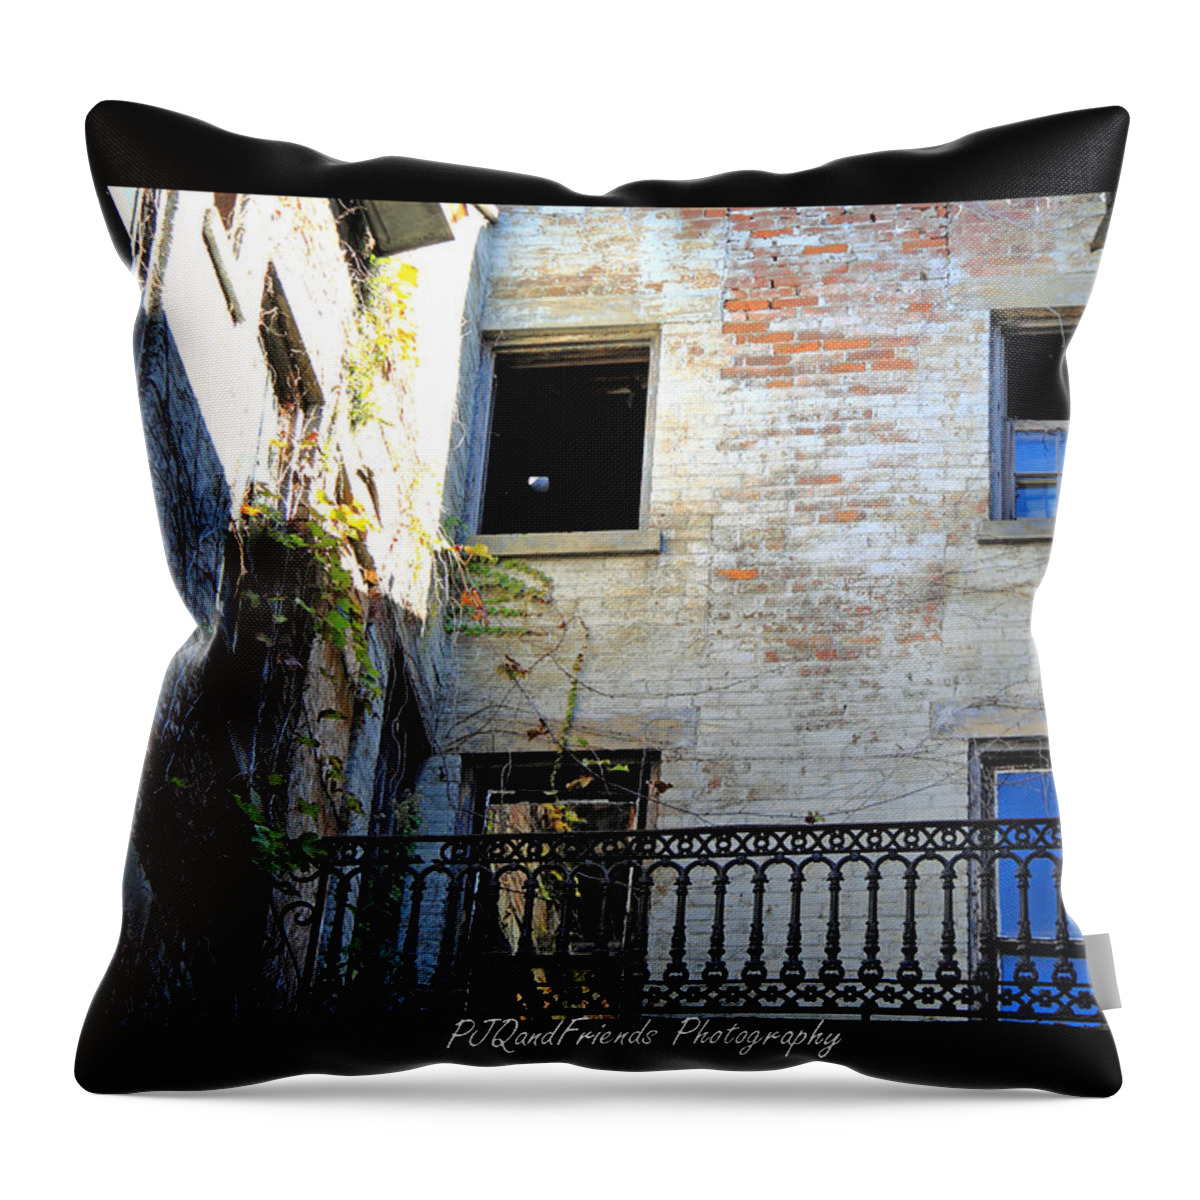 City Walk - Over-the-rhine Throw Pillow featuring the photograph City Walk - Over-the-Rhine #9 by PJQandFriends Photography